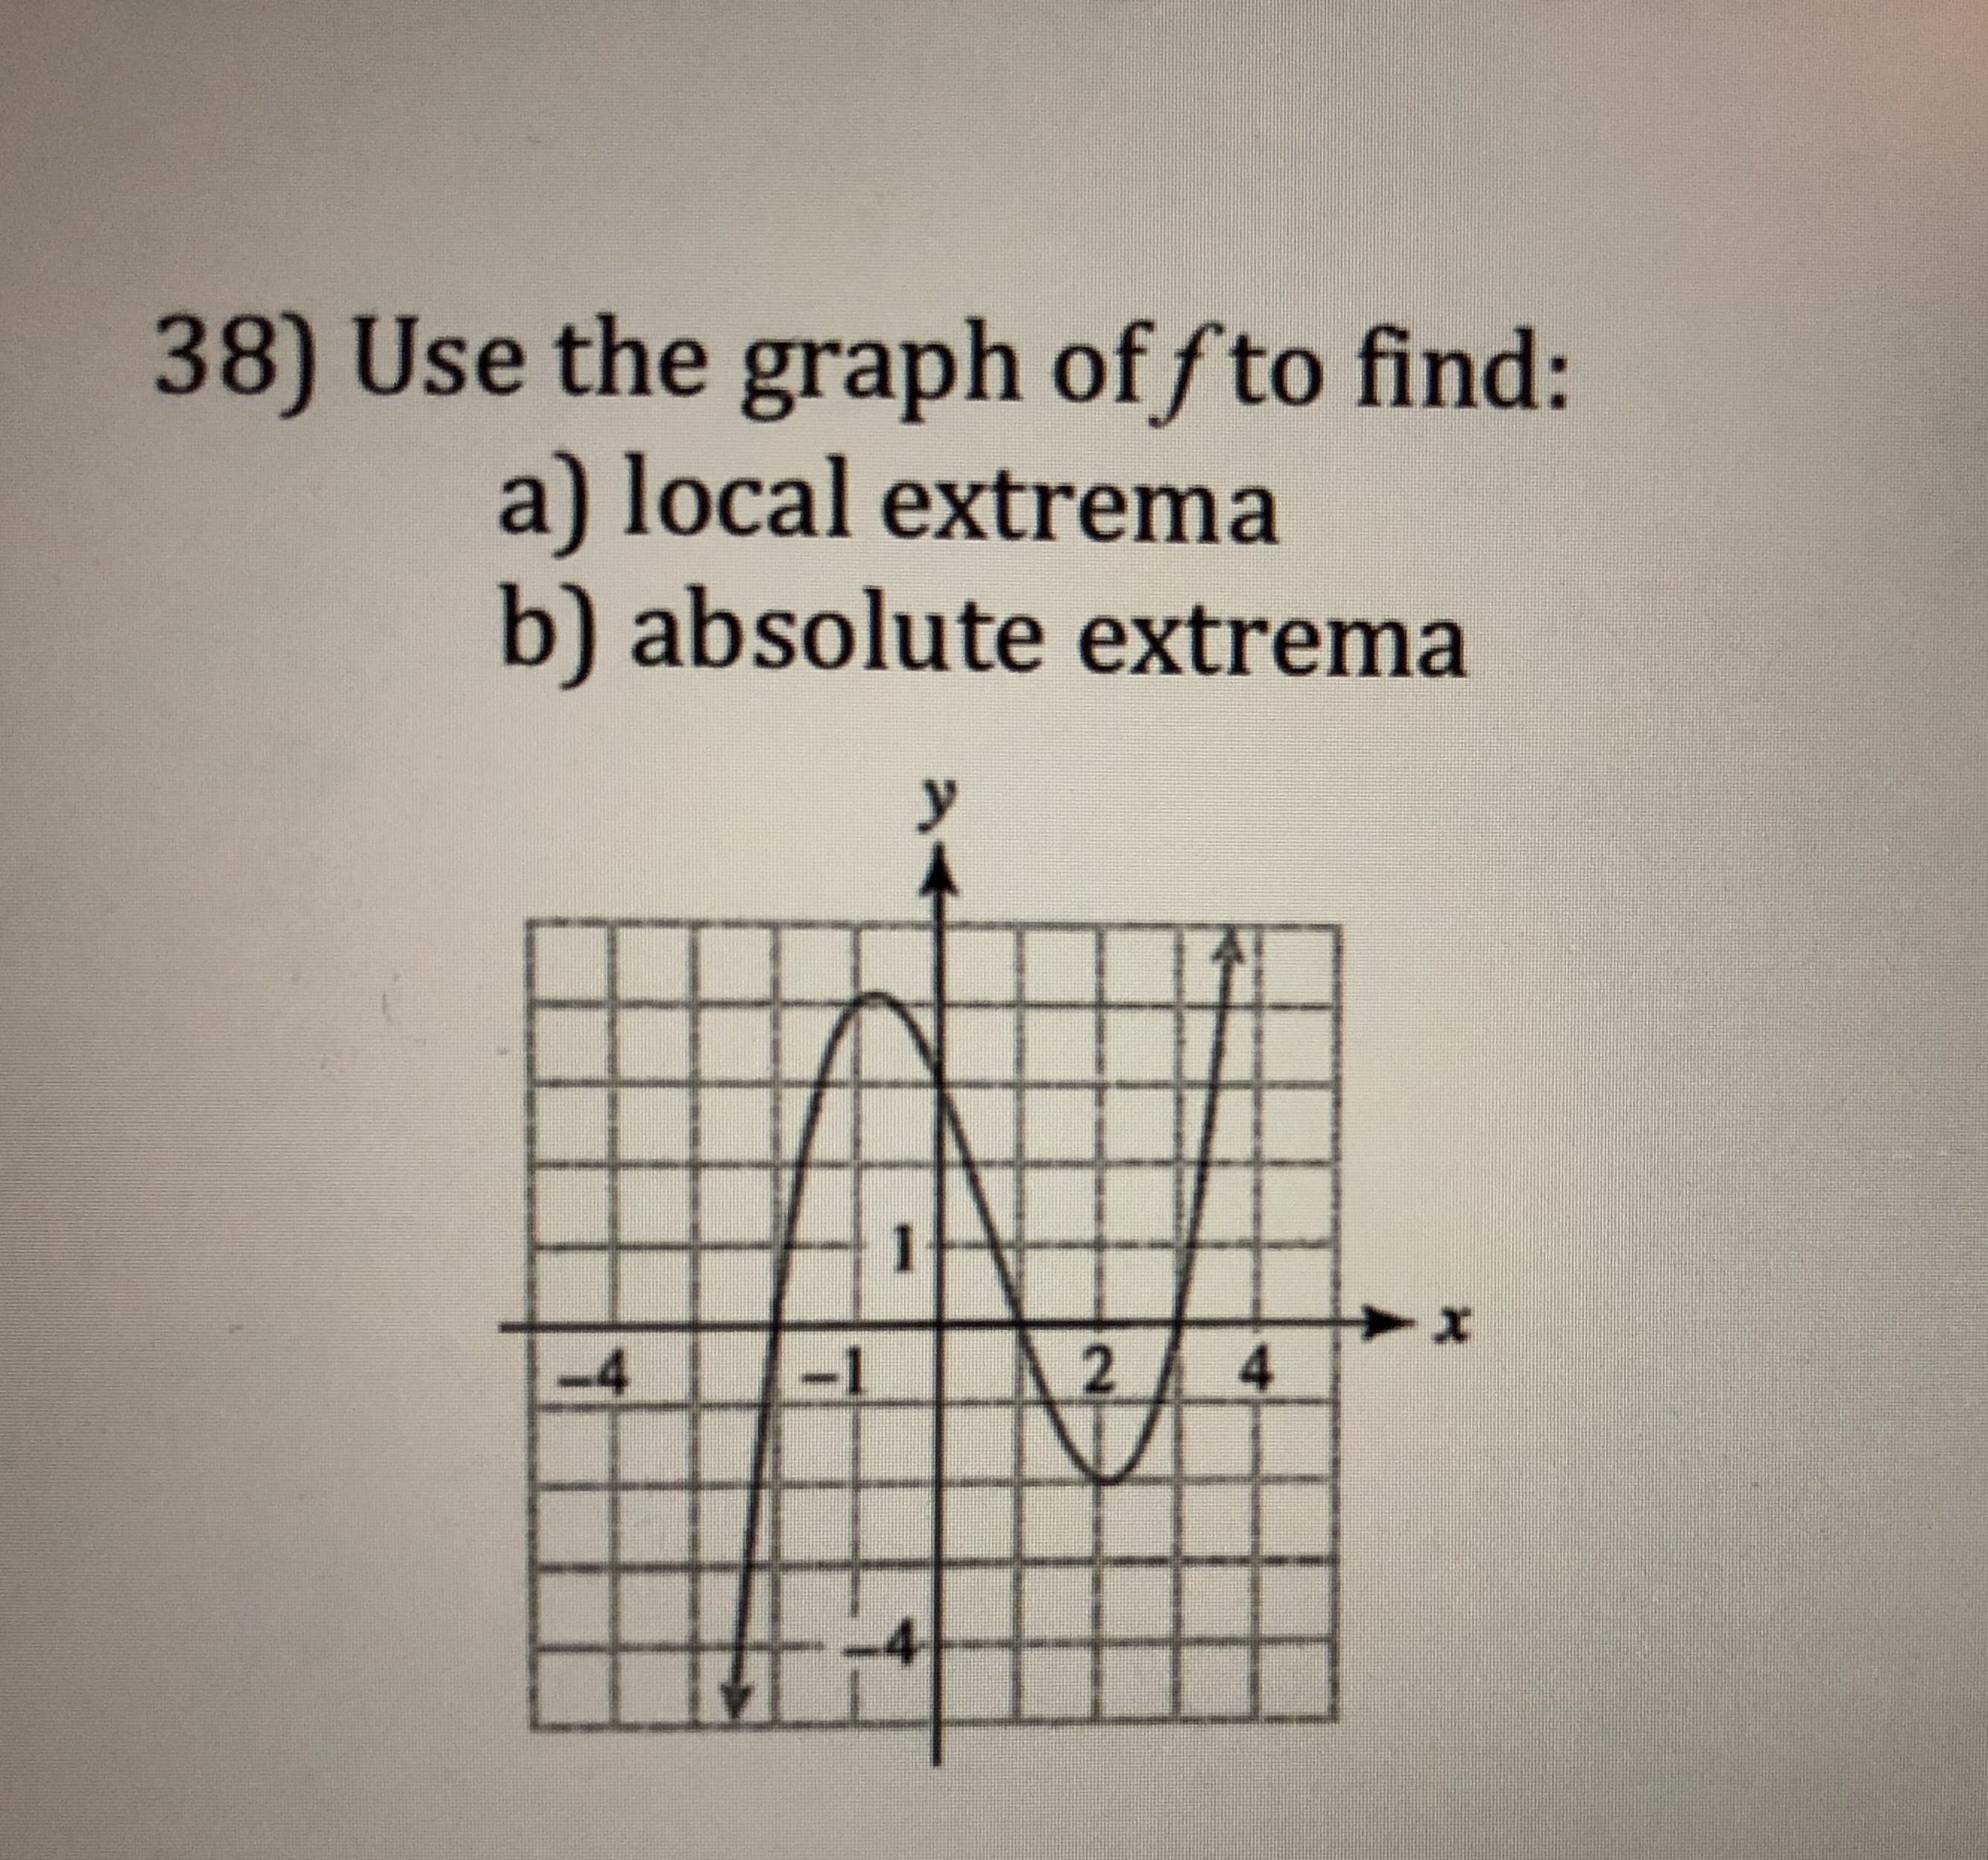 38) Use the graph of fto find:
a) local extrema
b) absolute extrema
4
